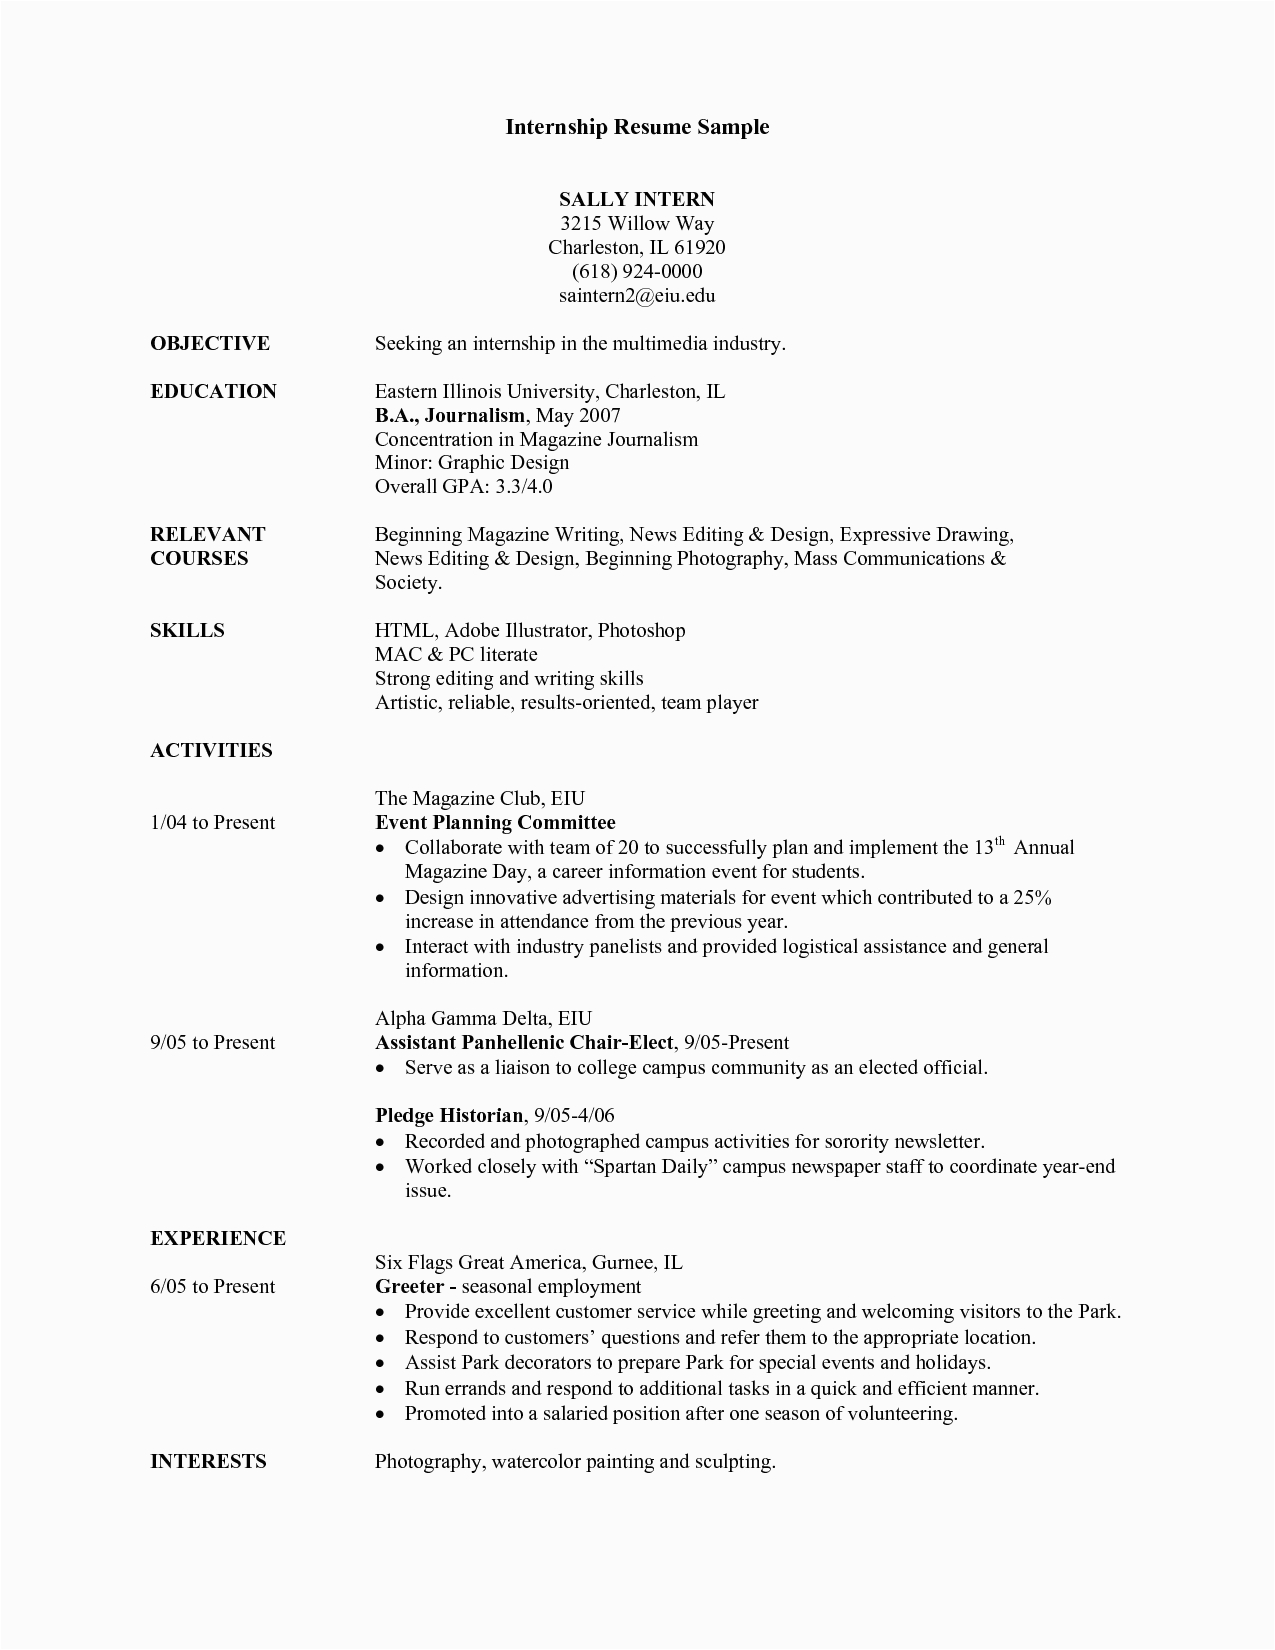 Sample Resume when Applying for College Internships Student Resume Example Sample College Internship Samples Students